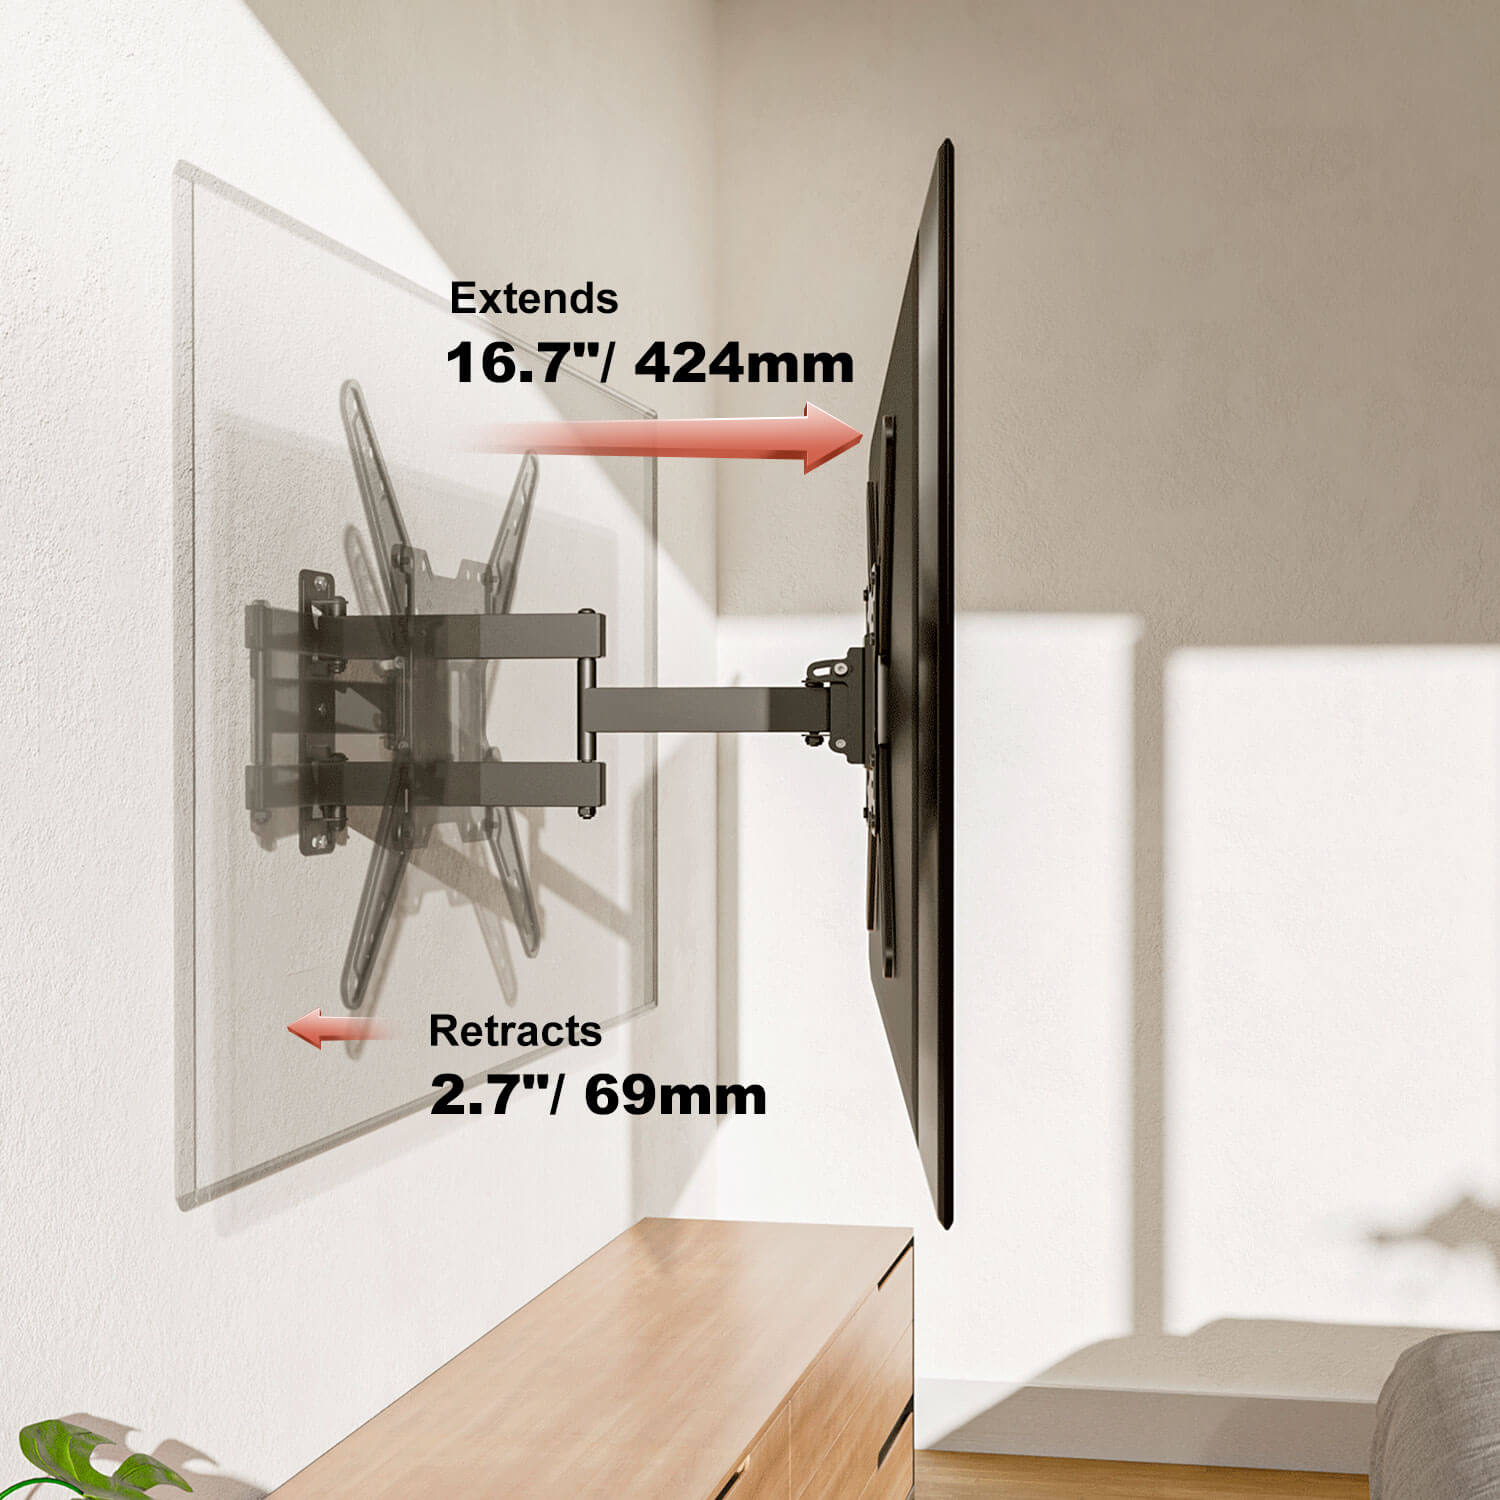 55 inch TV wall mount with 16.7'' extension and 2.7'' low profile